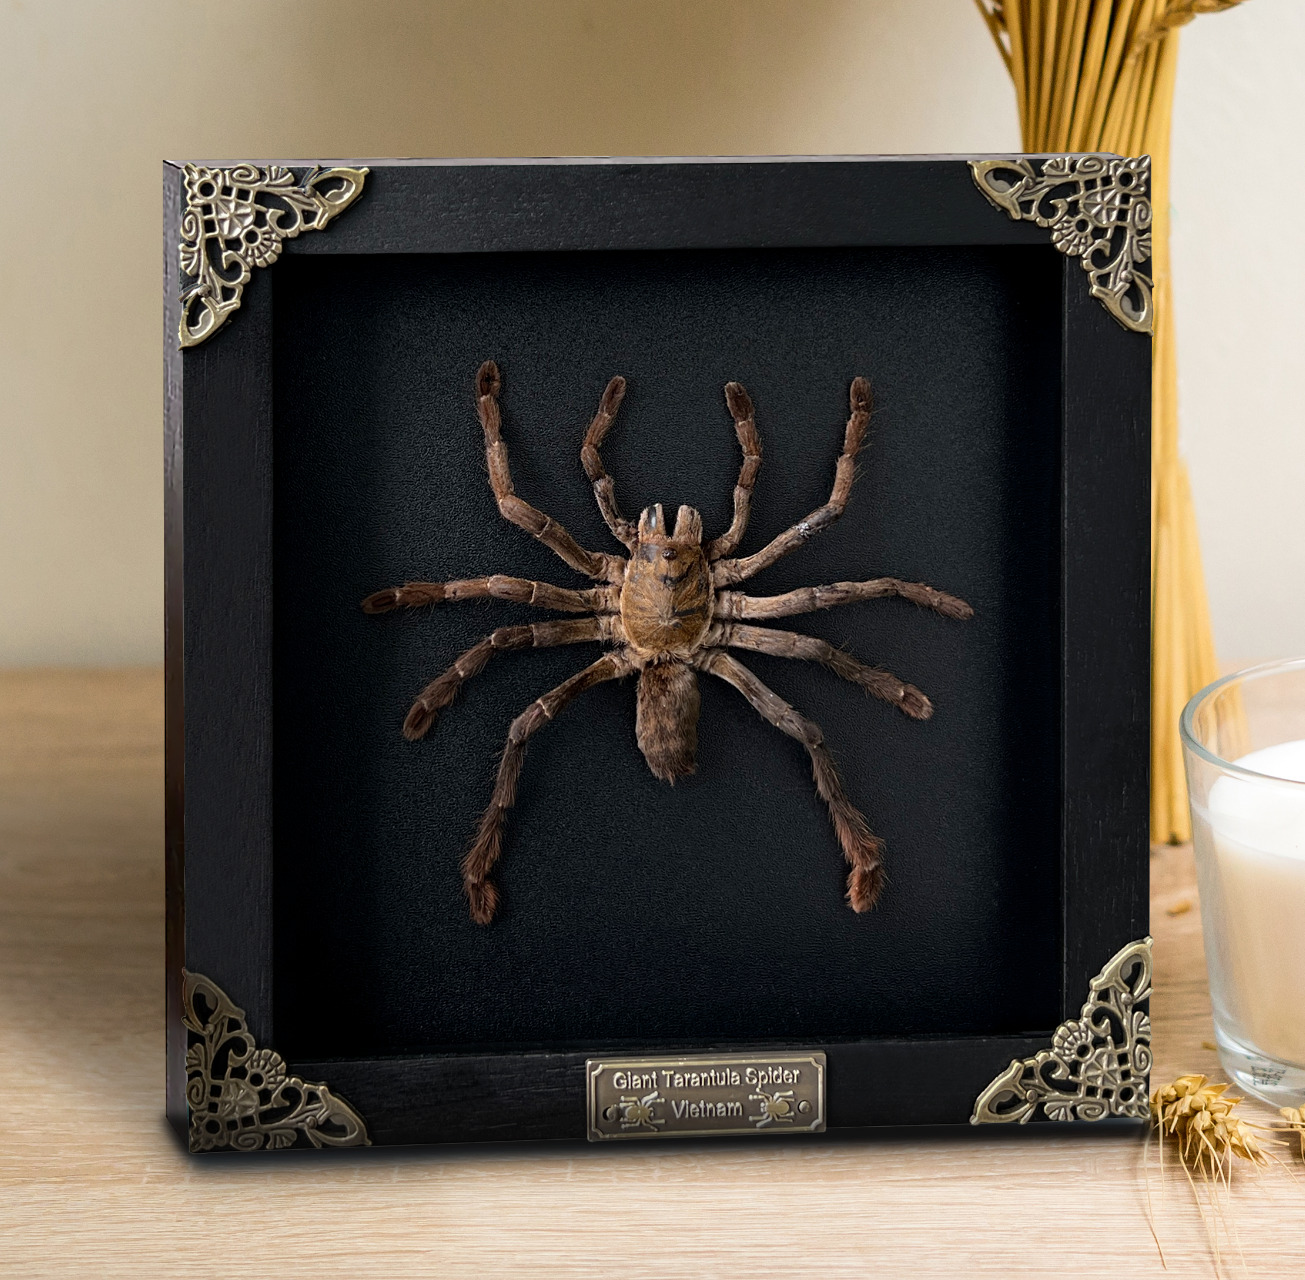 Black Spider Tarantula Framed Gothic Decor Insect Bug Taxidermy Gift For Lover